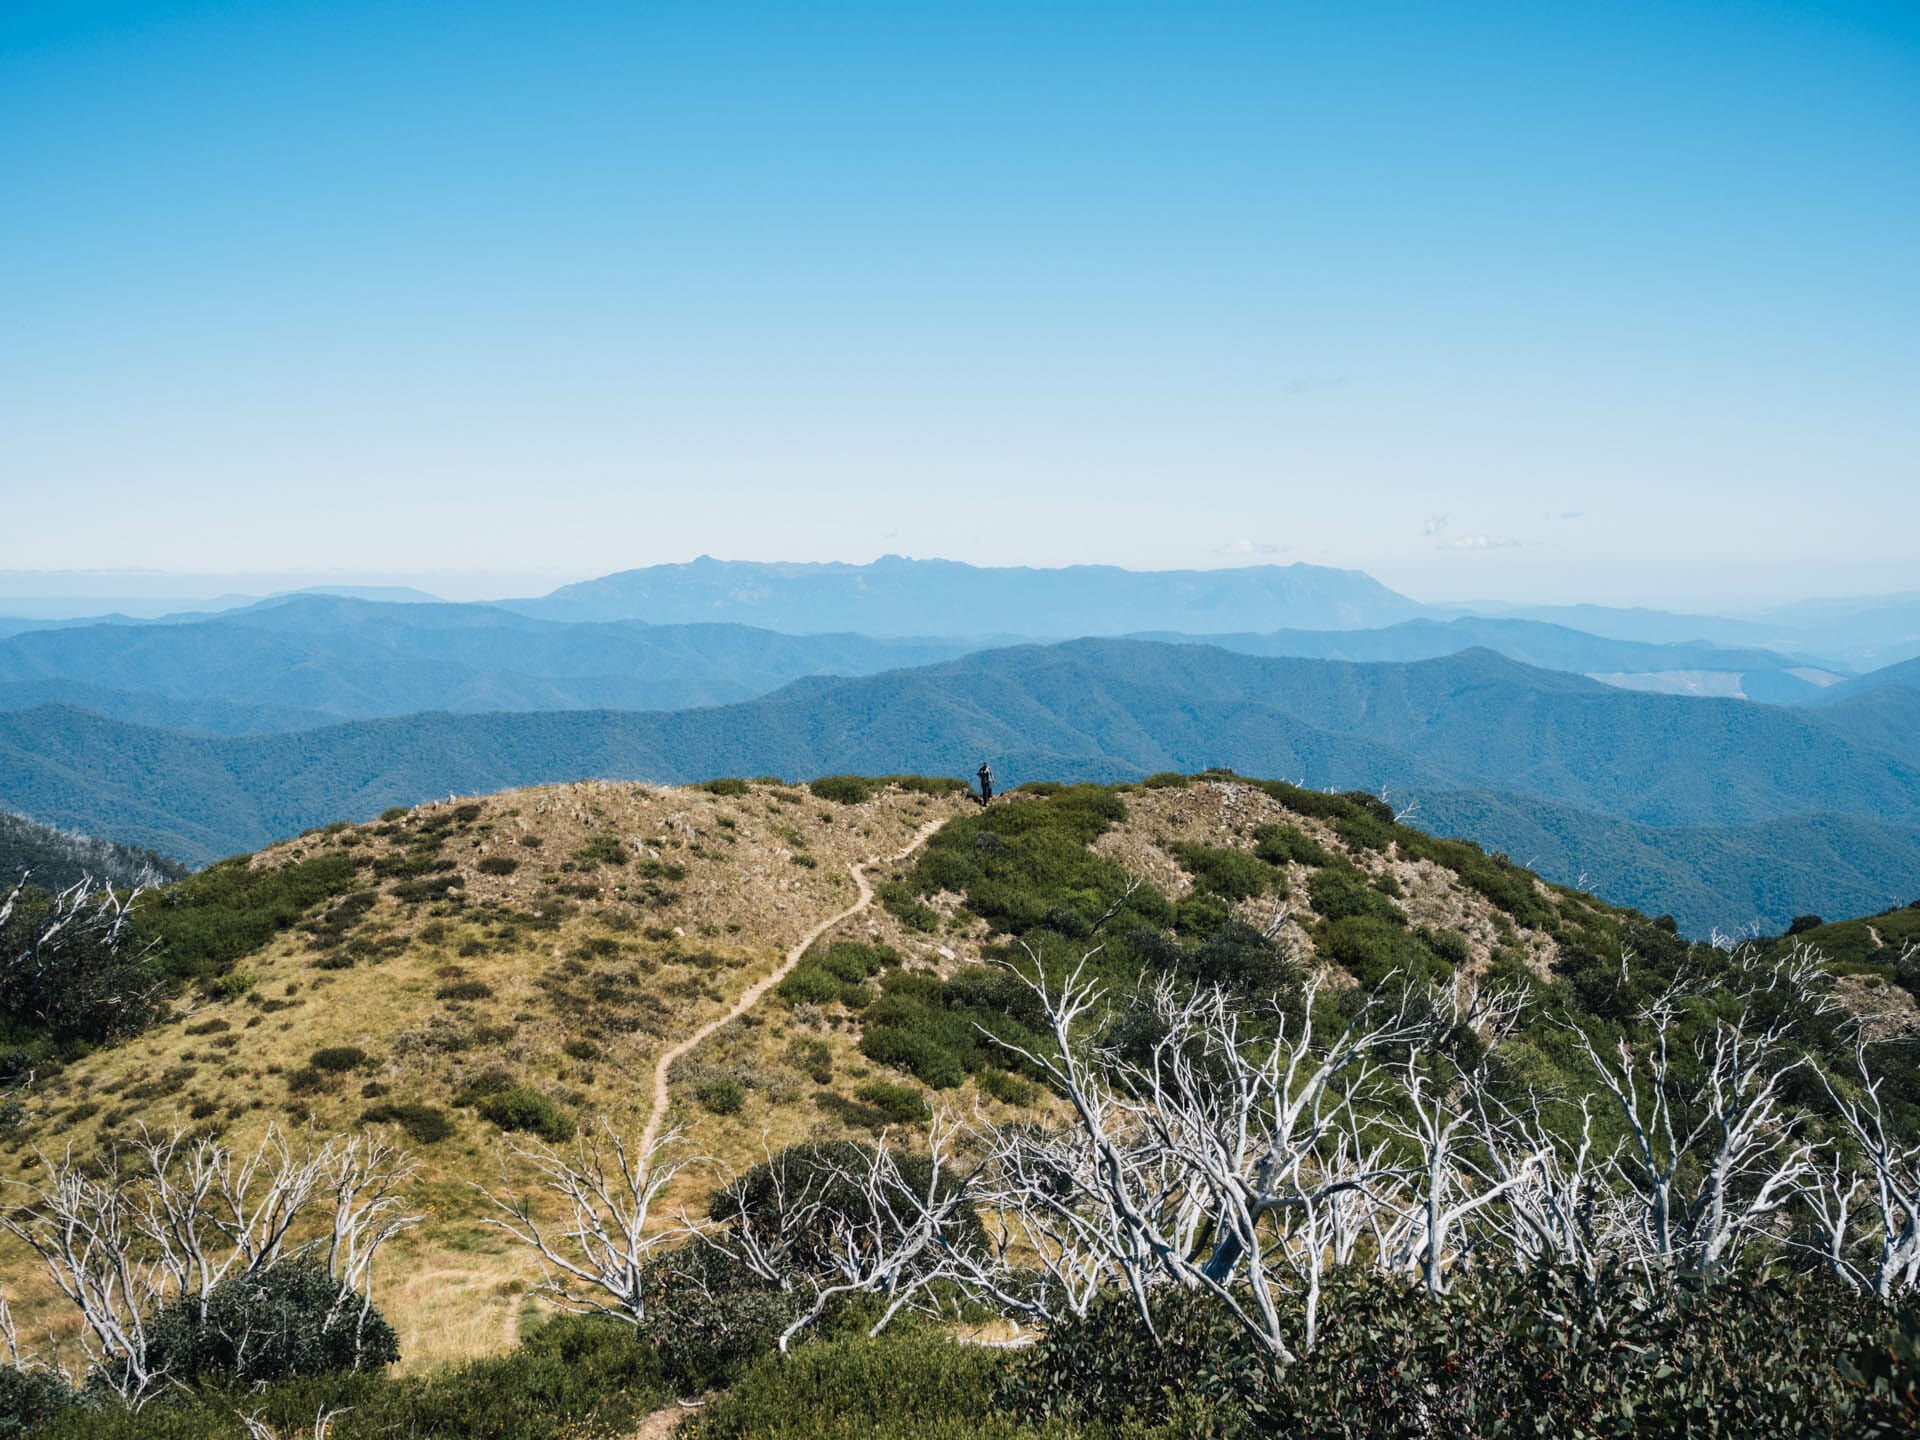 Hiking Mount Feathertop via Northwest Spur in Alpine National Park - Elisha Donkin - The steep climb with views in every direction